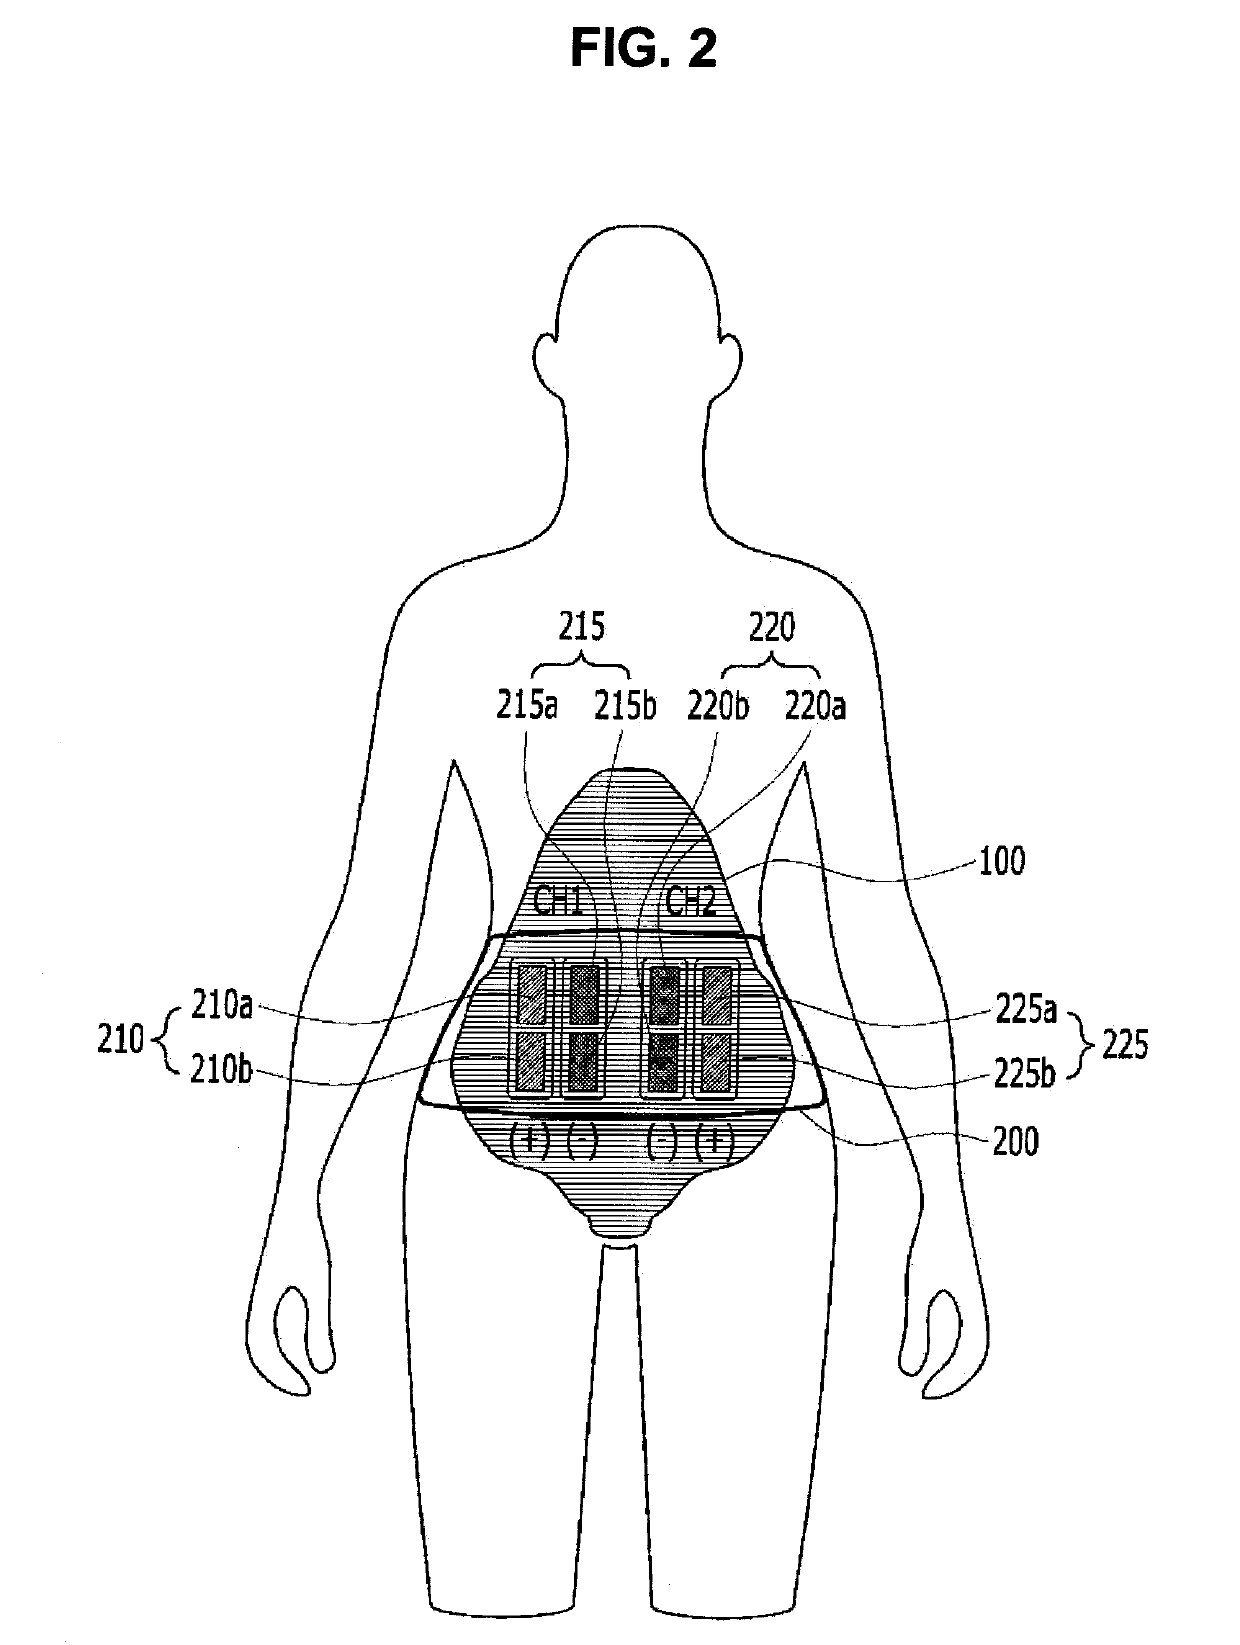 Drive device of electrode channel for strengthening core muscle of abdominal region